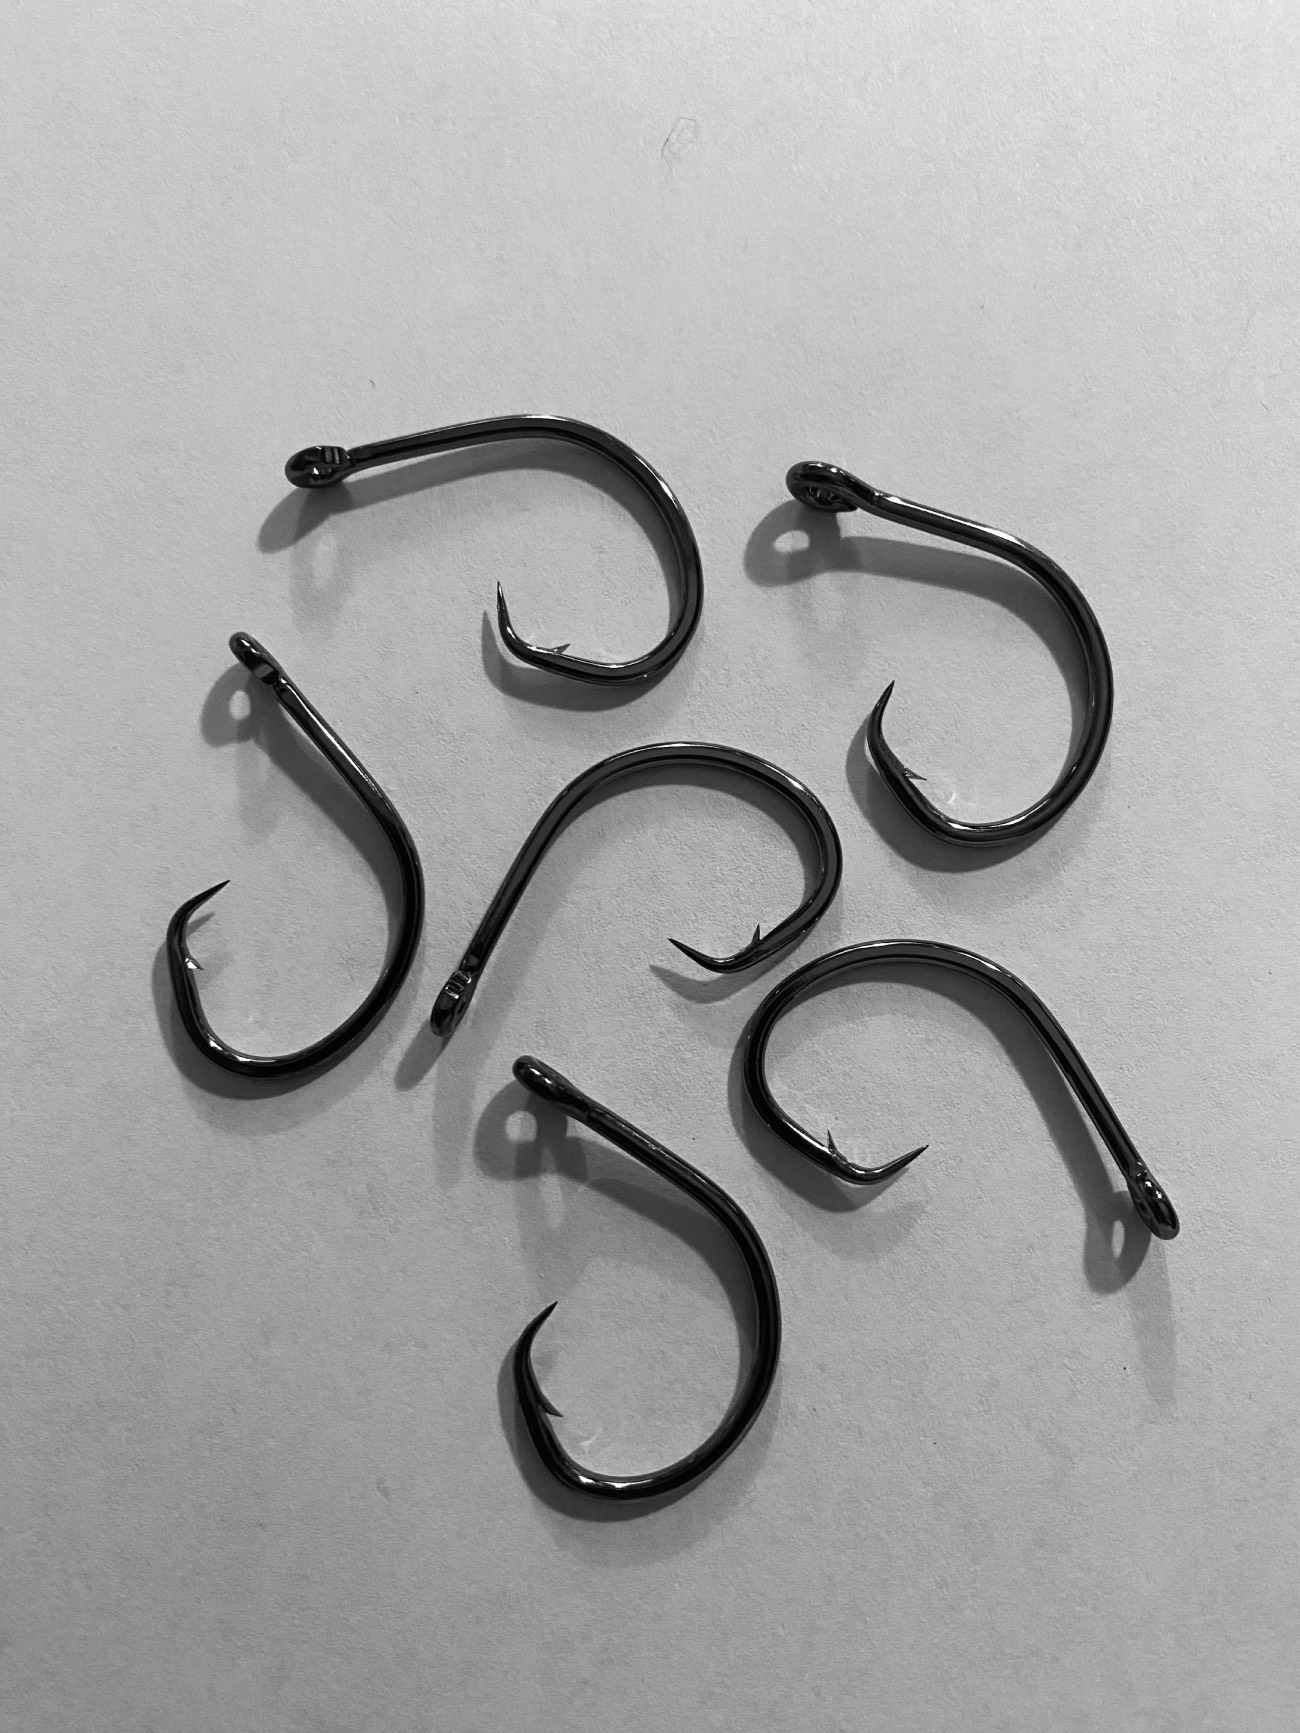 Types of Fishing Hooks and How to Use Them